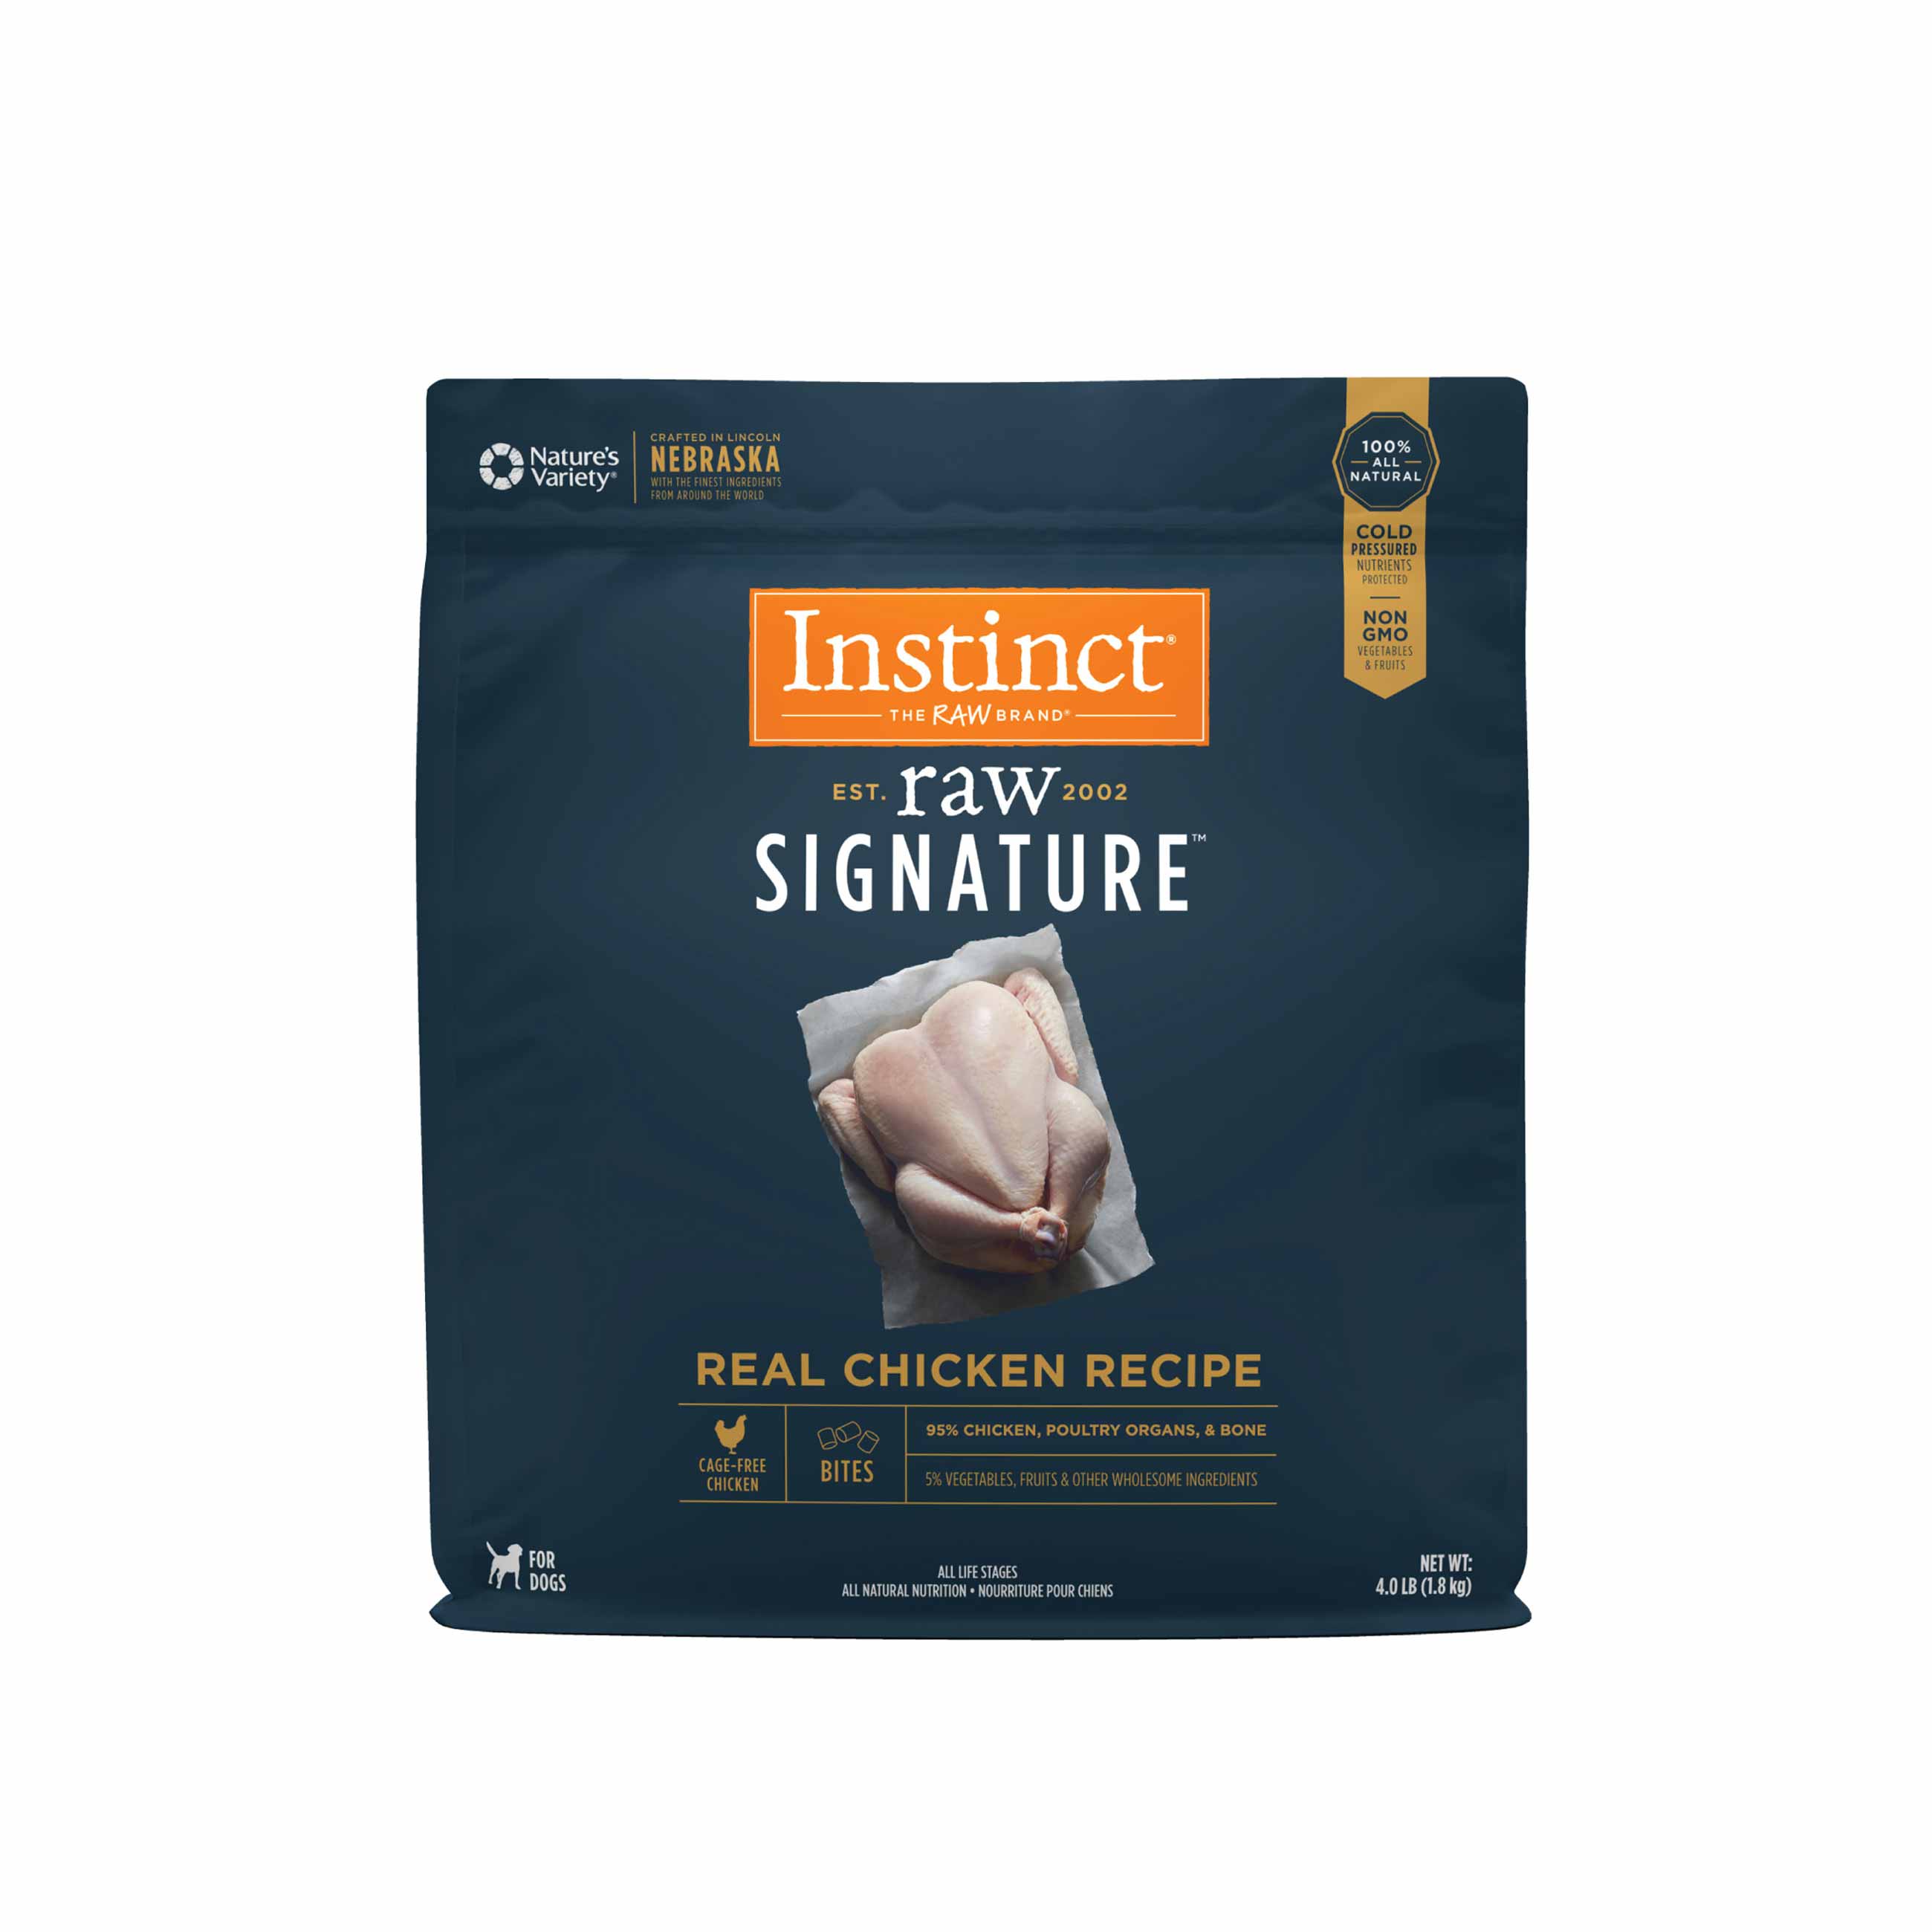 Instinct Frozen Raw Signature Bites Grain-Free Real Chicken Recipe Dog Food, 4 Pound Bag - Not Available for Delivery